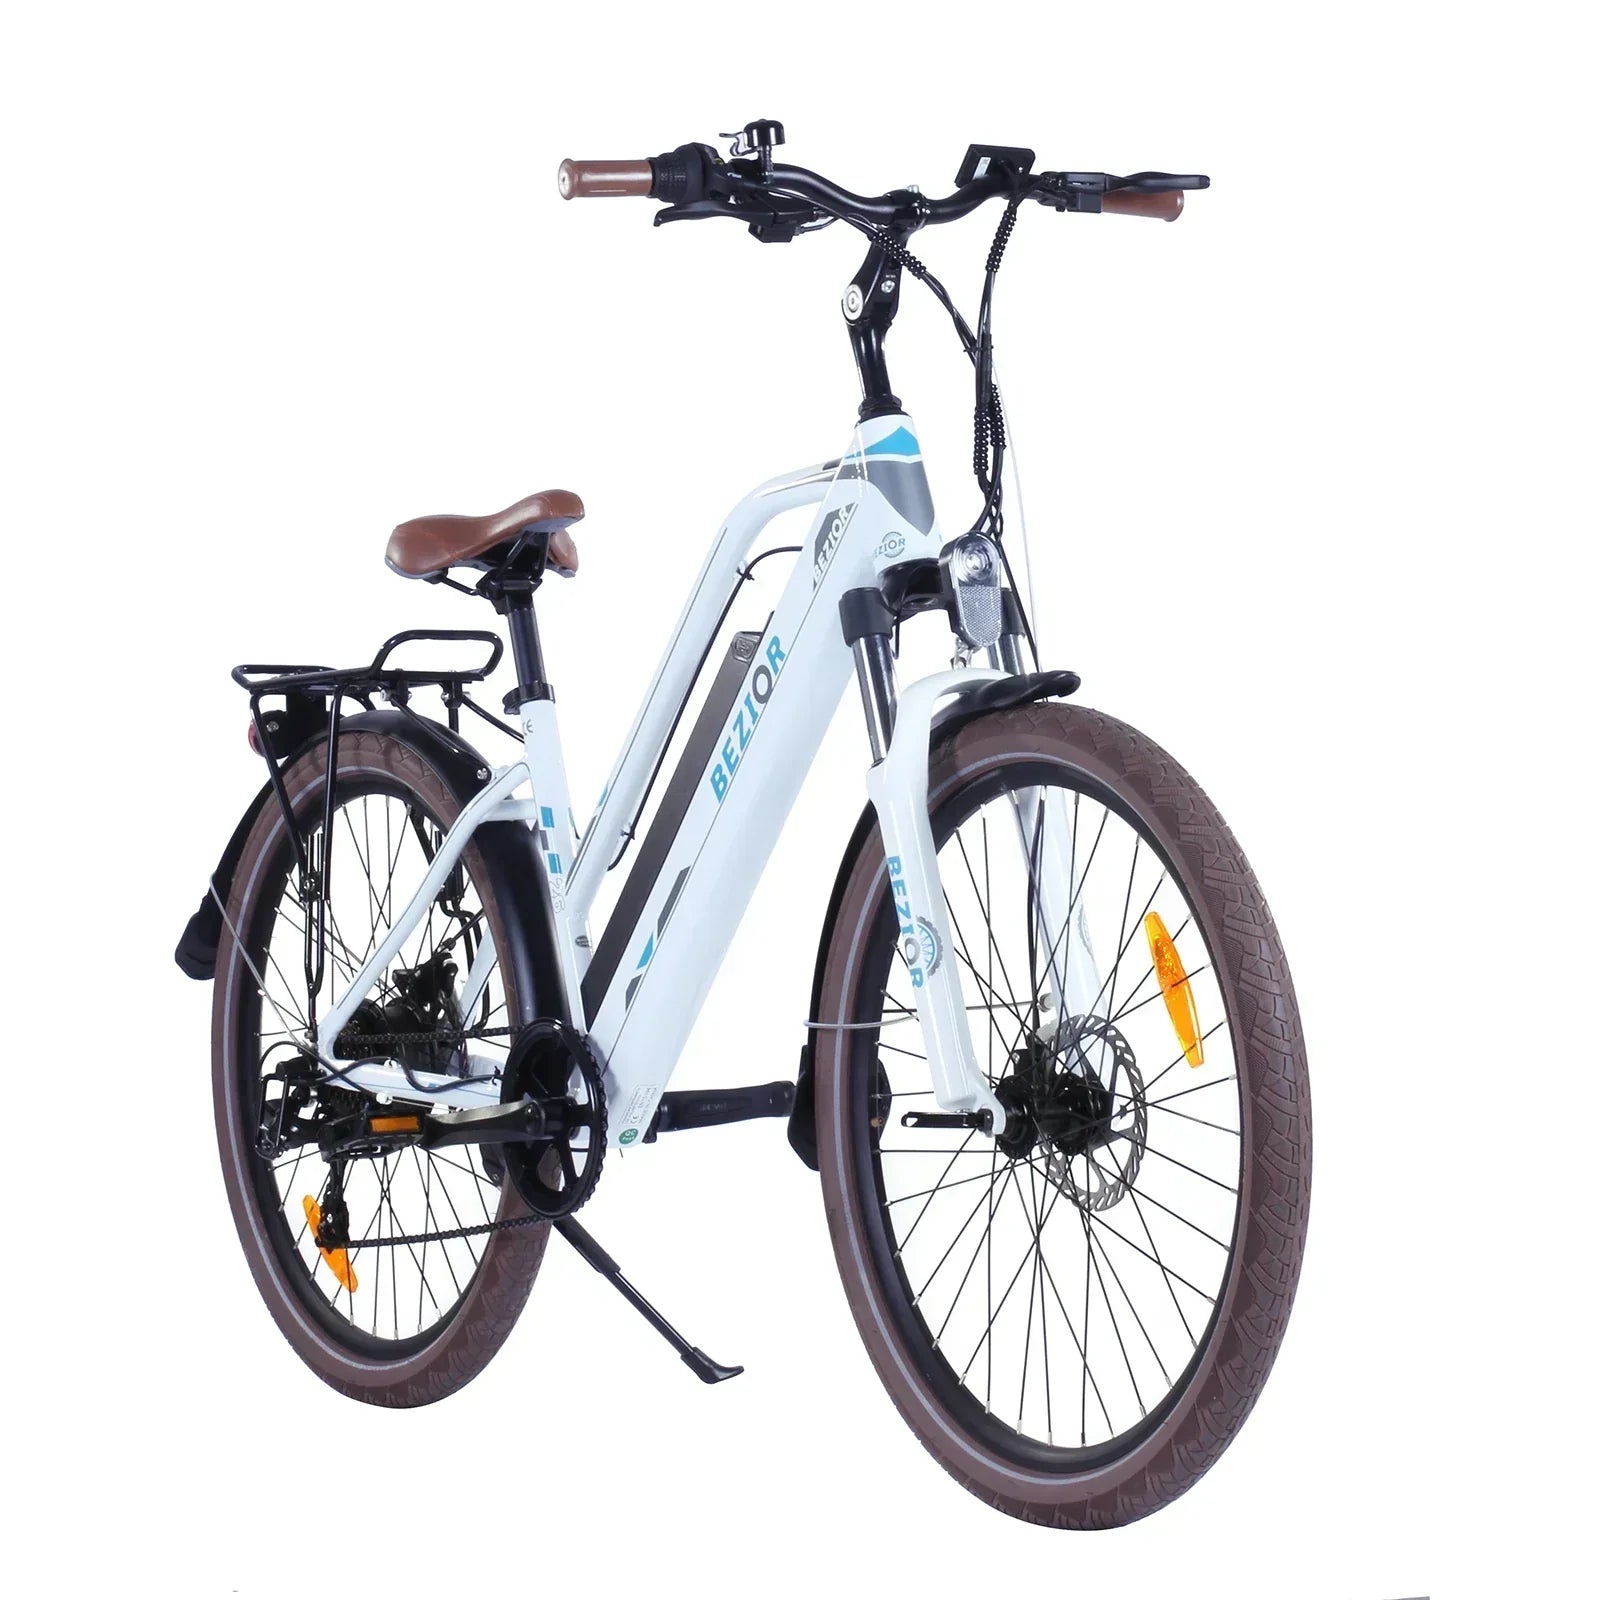 Bezior M2 Pro Electric Bike - Pogo Cycles available in cycle to work